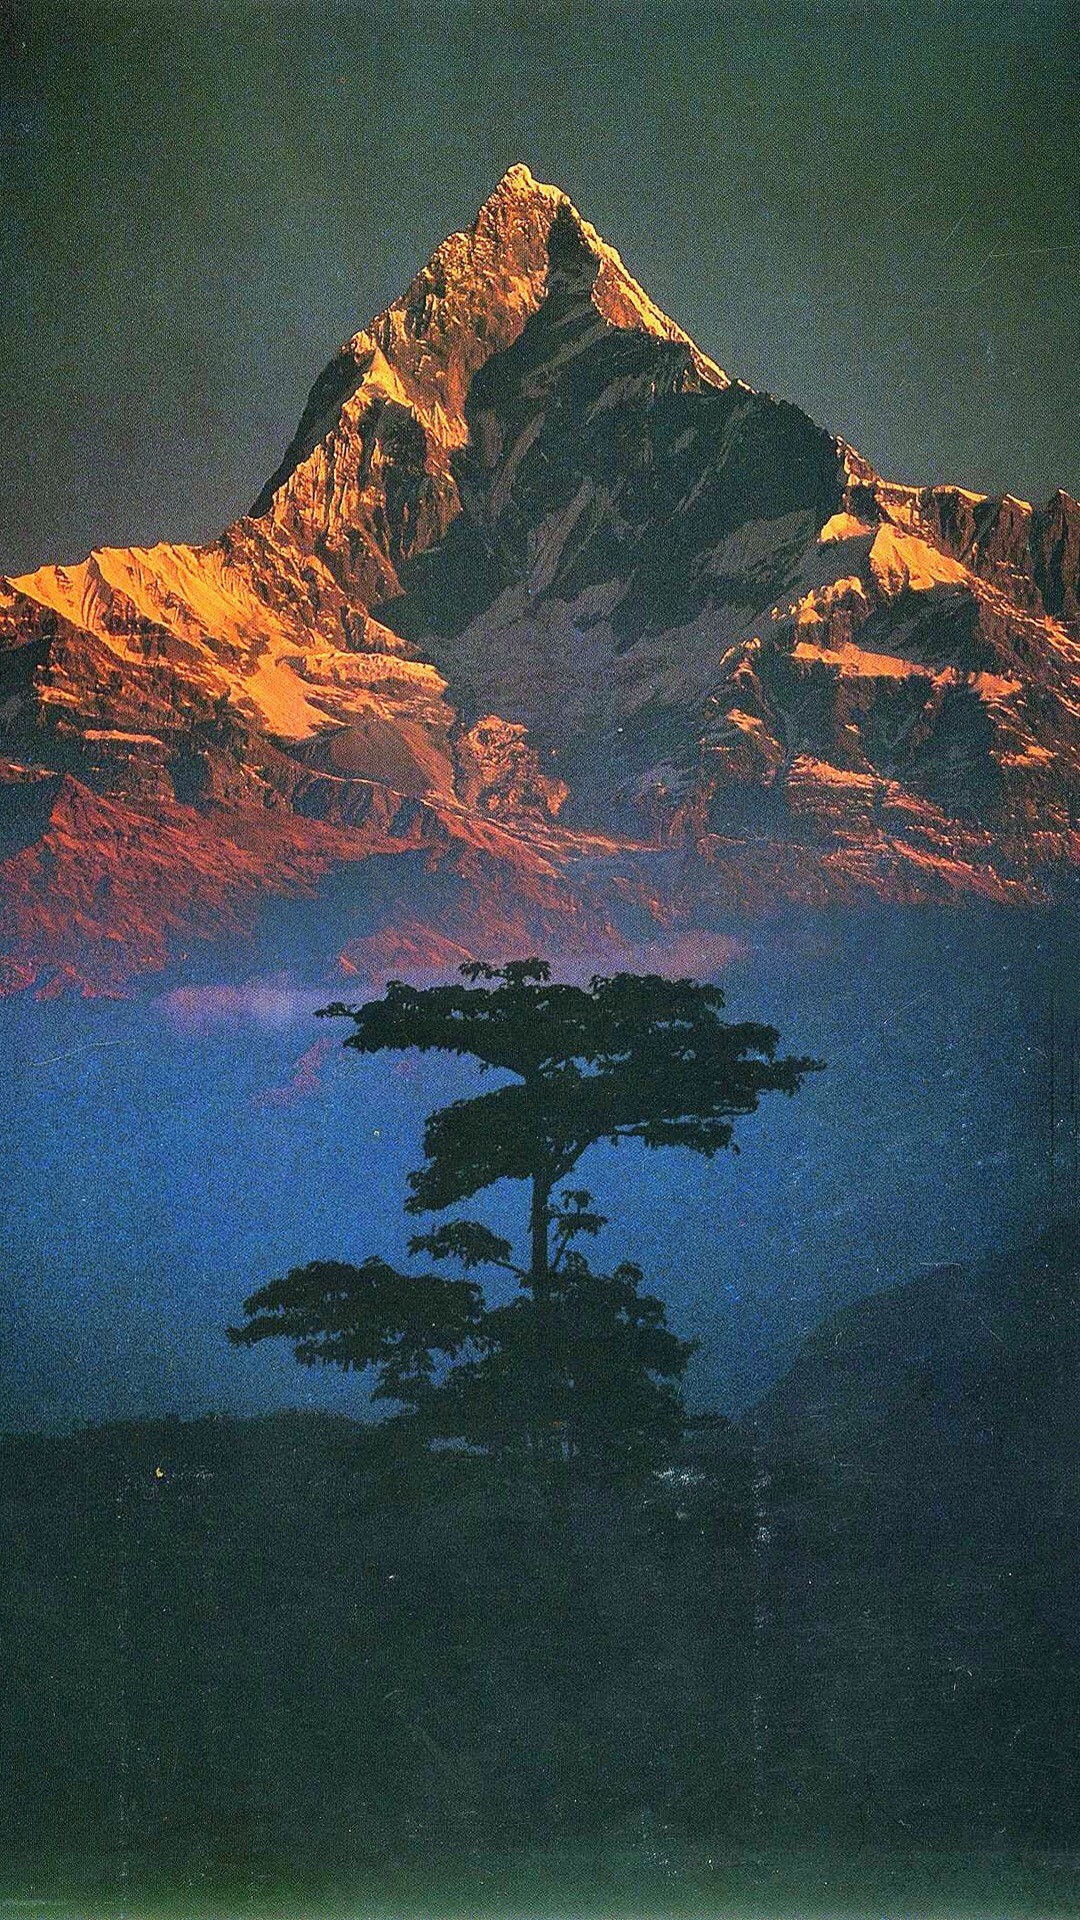 General 1080x1920 nature landscape mountains trees portrait display filter Nepal snowy mountain sunlight Annapurna Himalayas